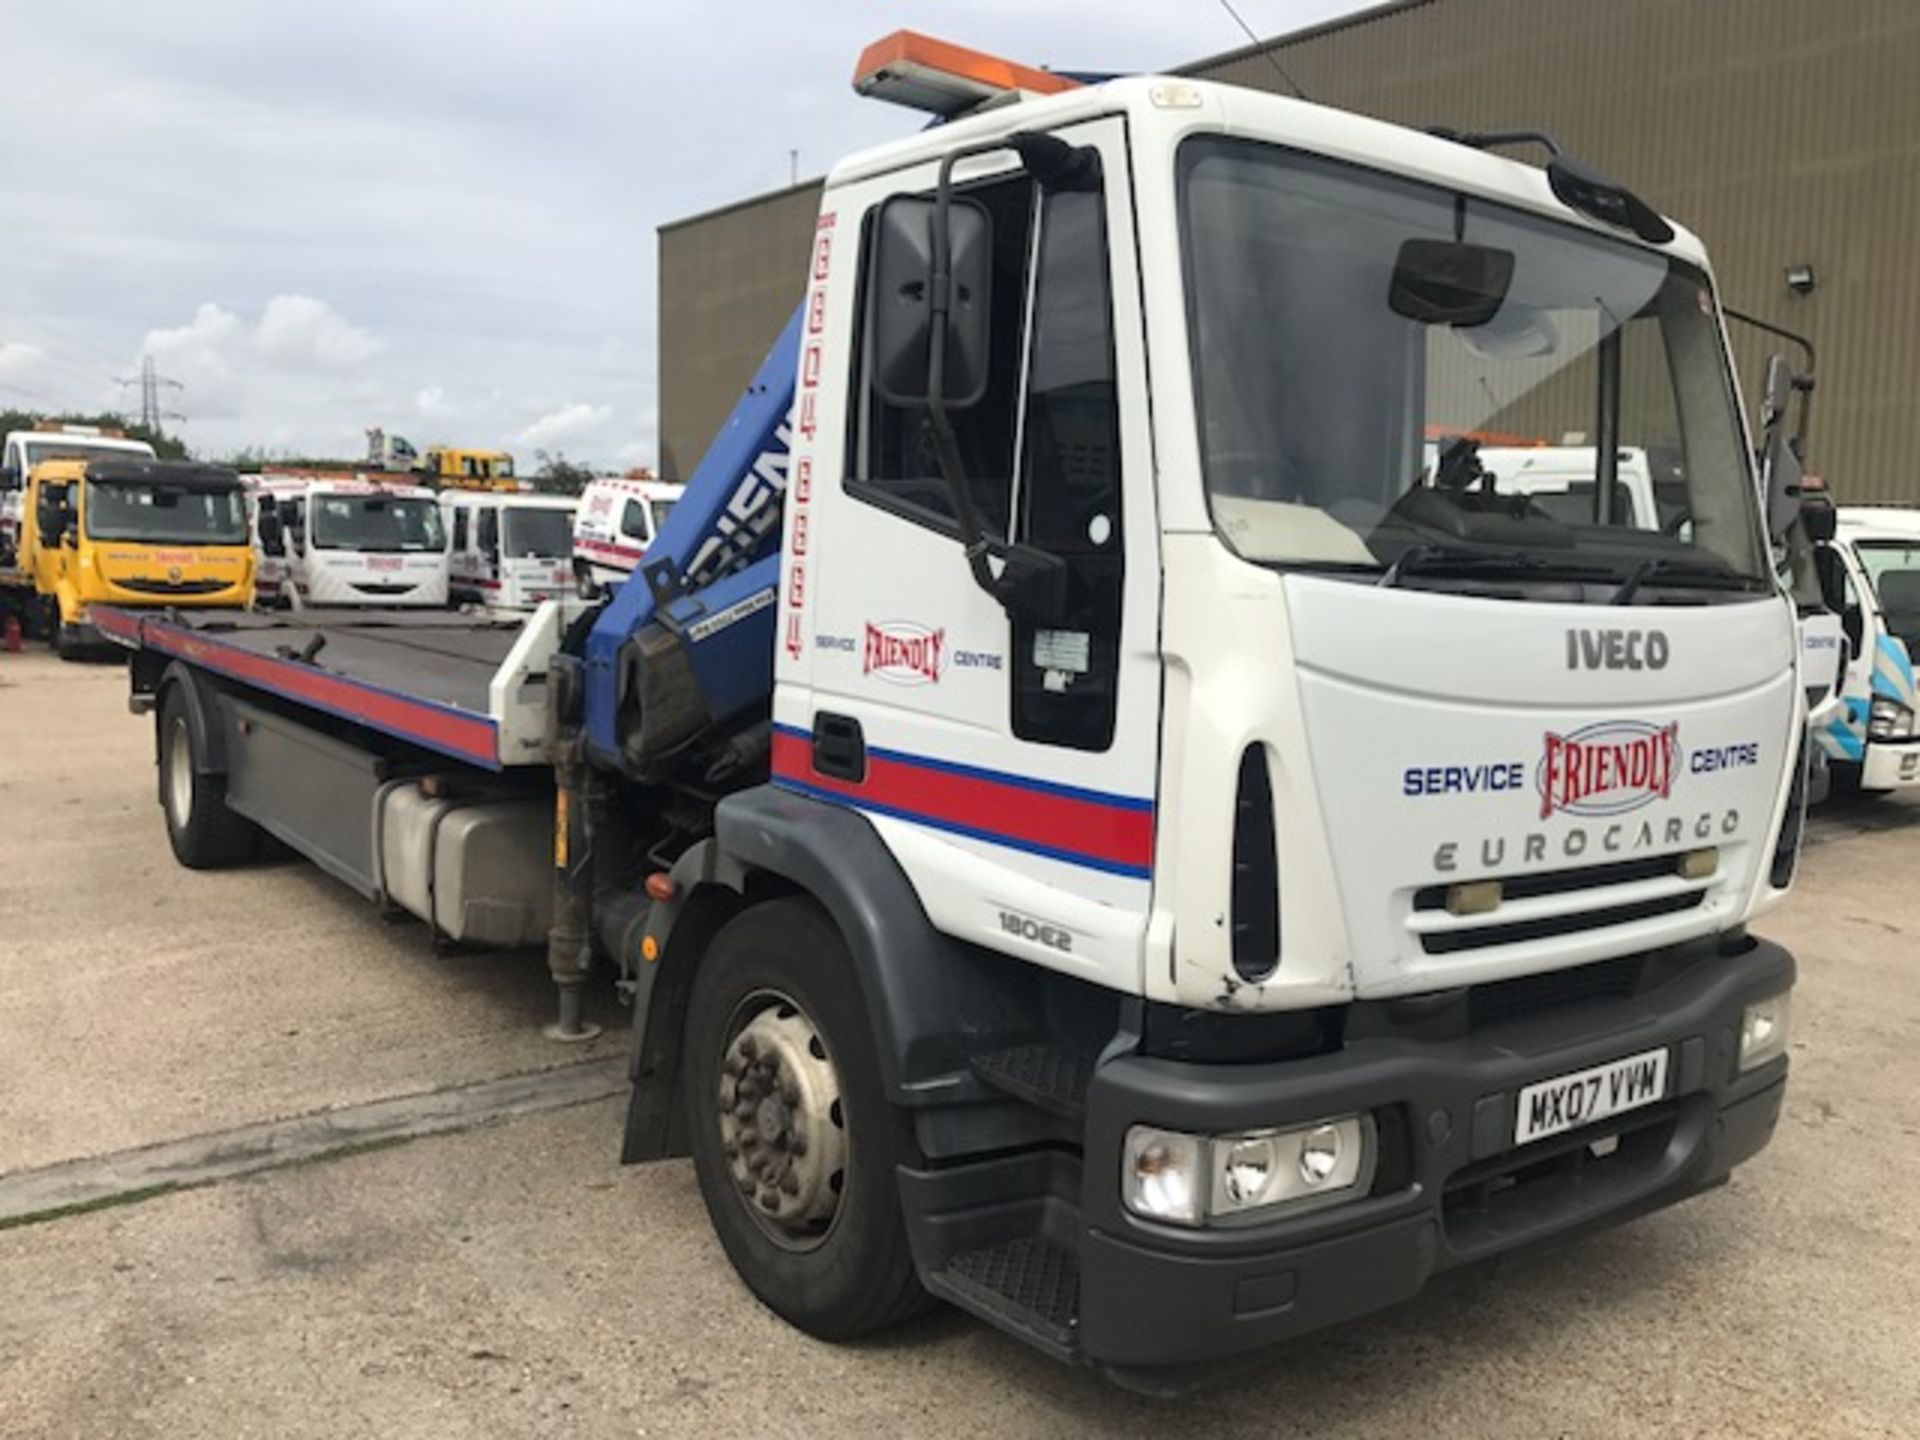 2007 Iveco Eurocargo 180E25 18T day cab breakdown recovery vehicle complete with Hiab crane, Roger